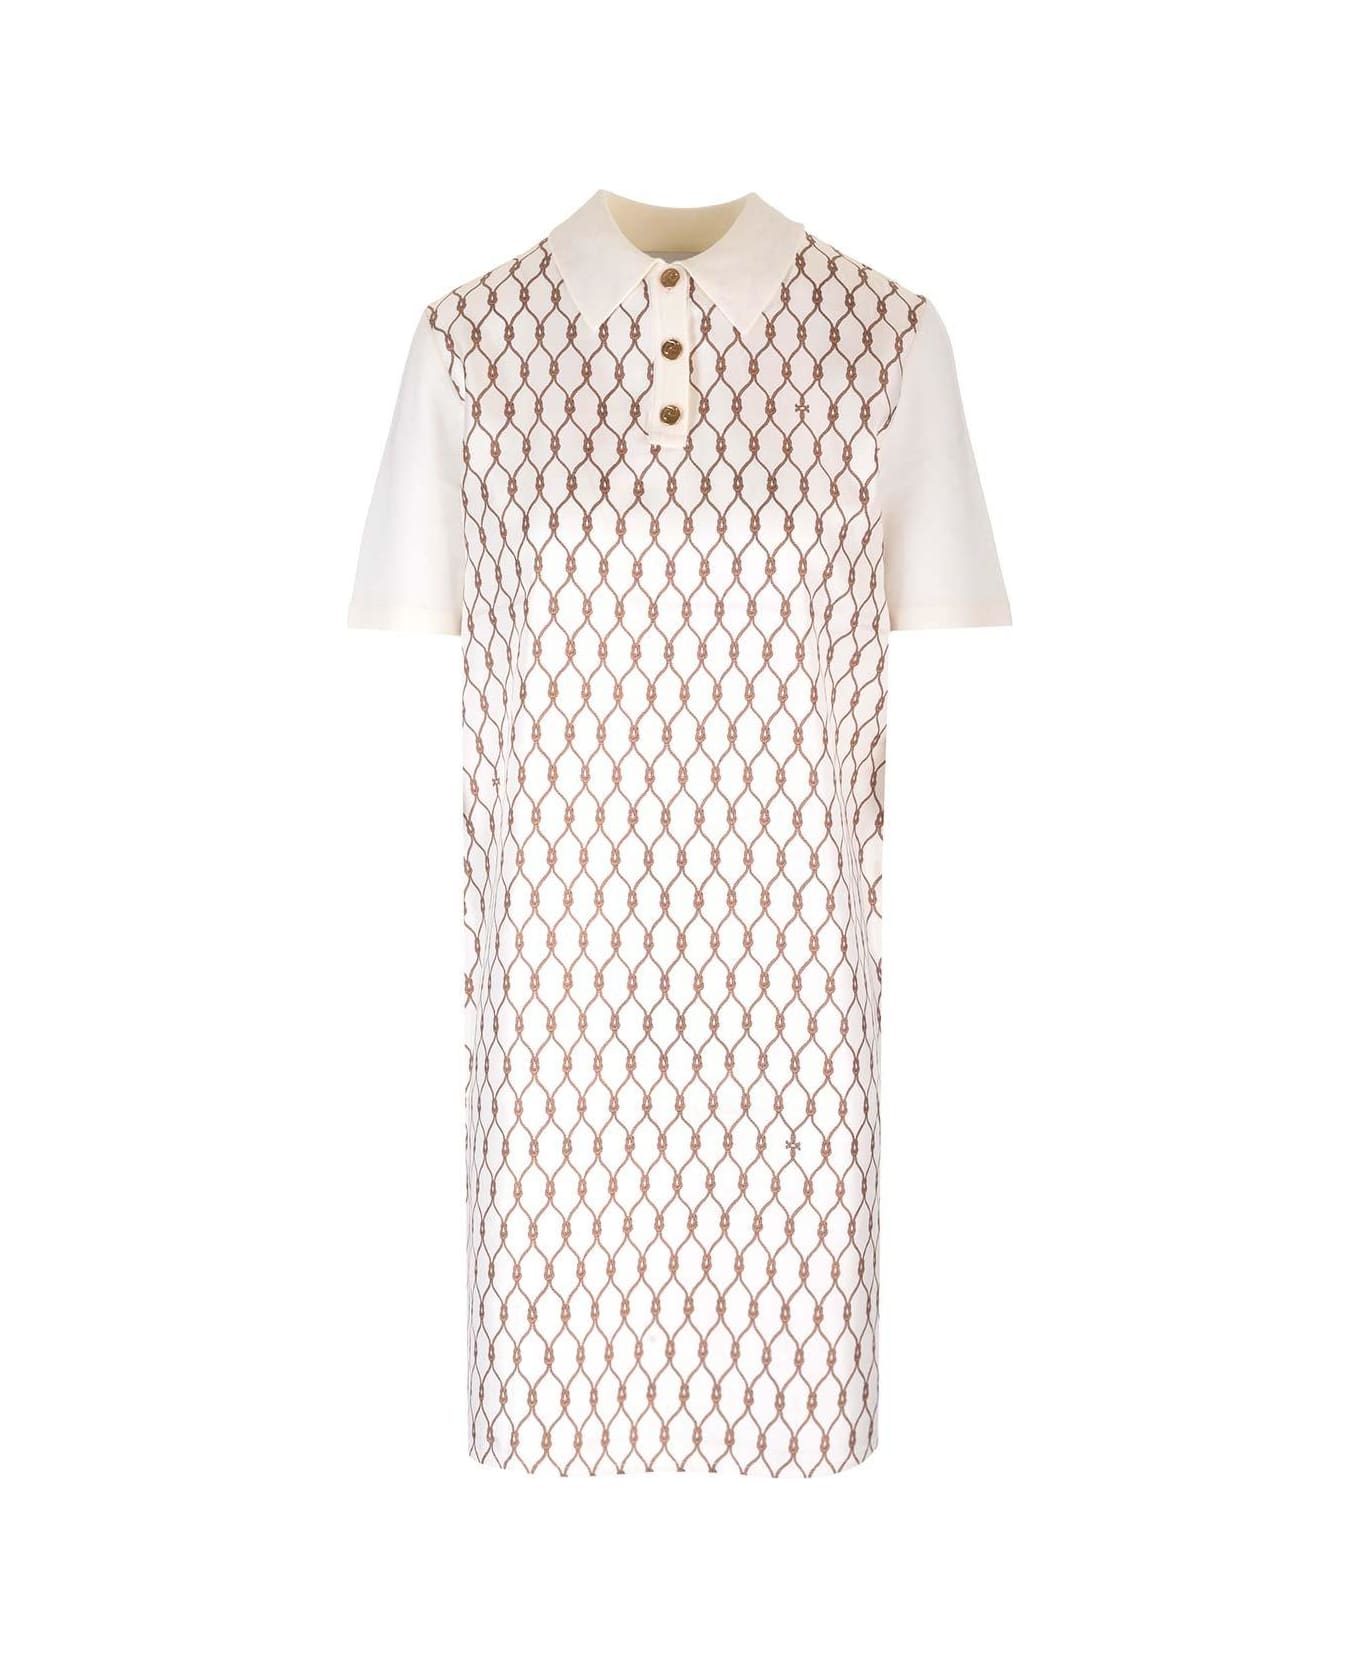 Tory Burch Short-sleeved Polo Dress - Multicolor